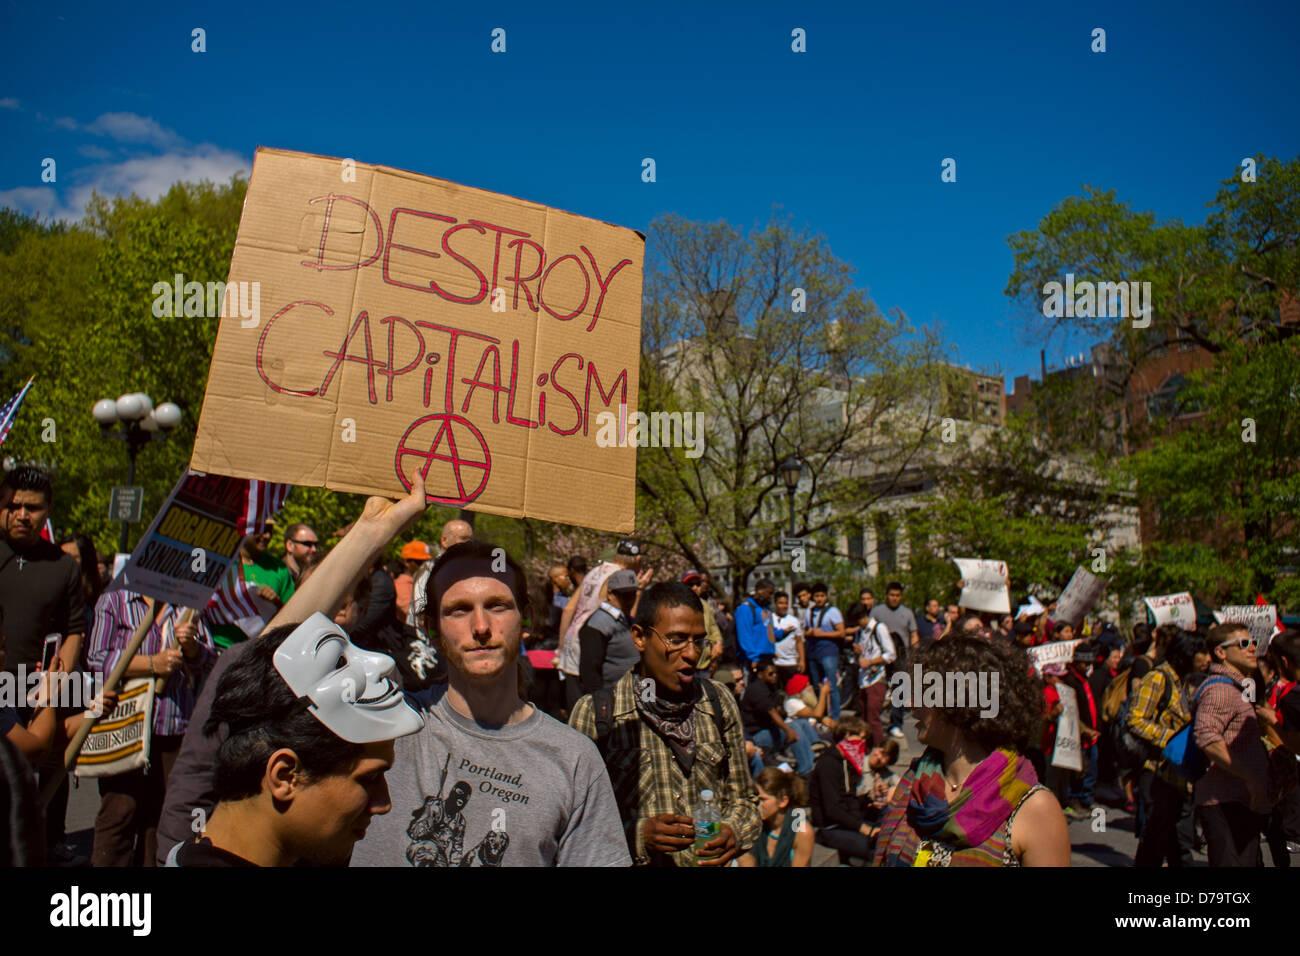 Wednesday, May 1, 2013, New York, NY, US:  A man holds a sign reading 'Destroy capitalism' as protesters gather in New York's Union Square to mark  International Workers' Day, also known as May Day. Stock Photo